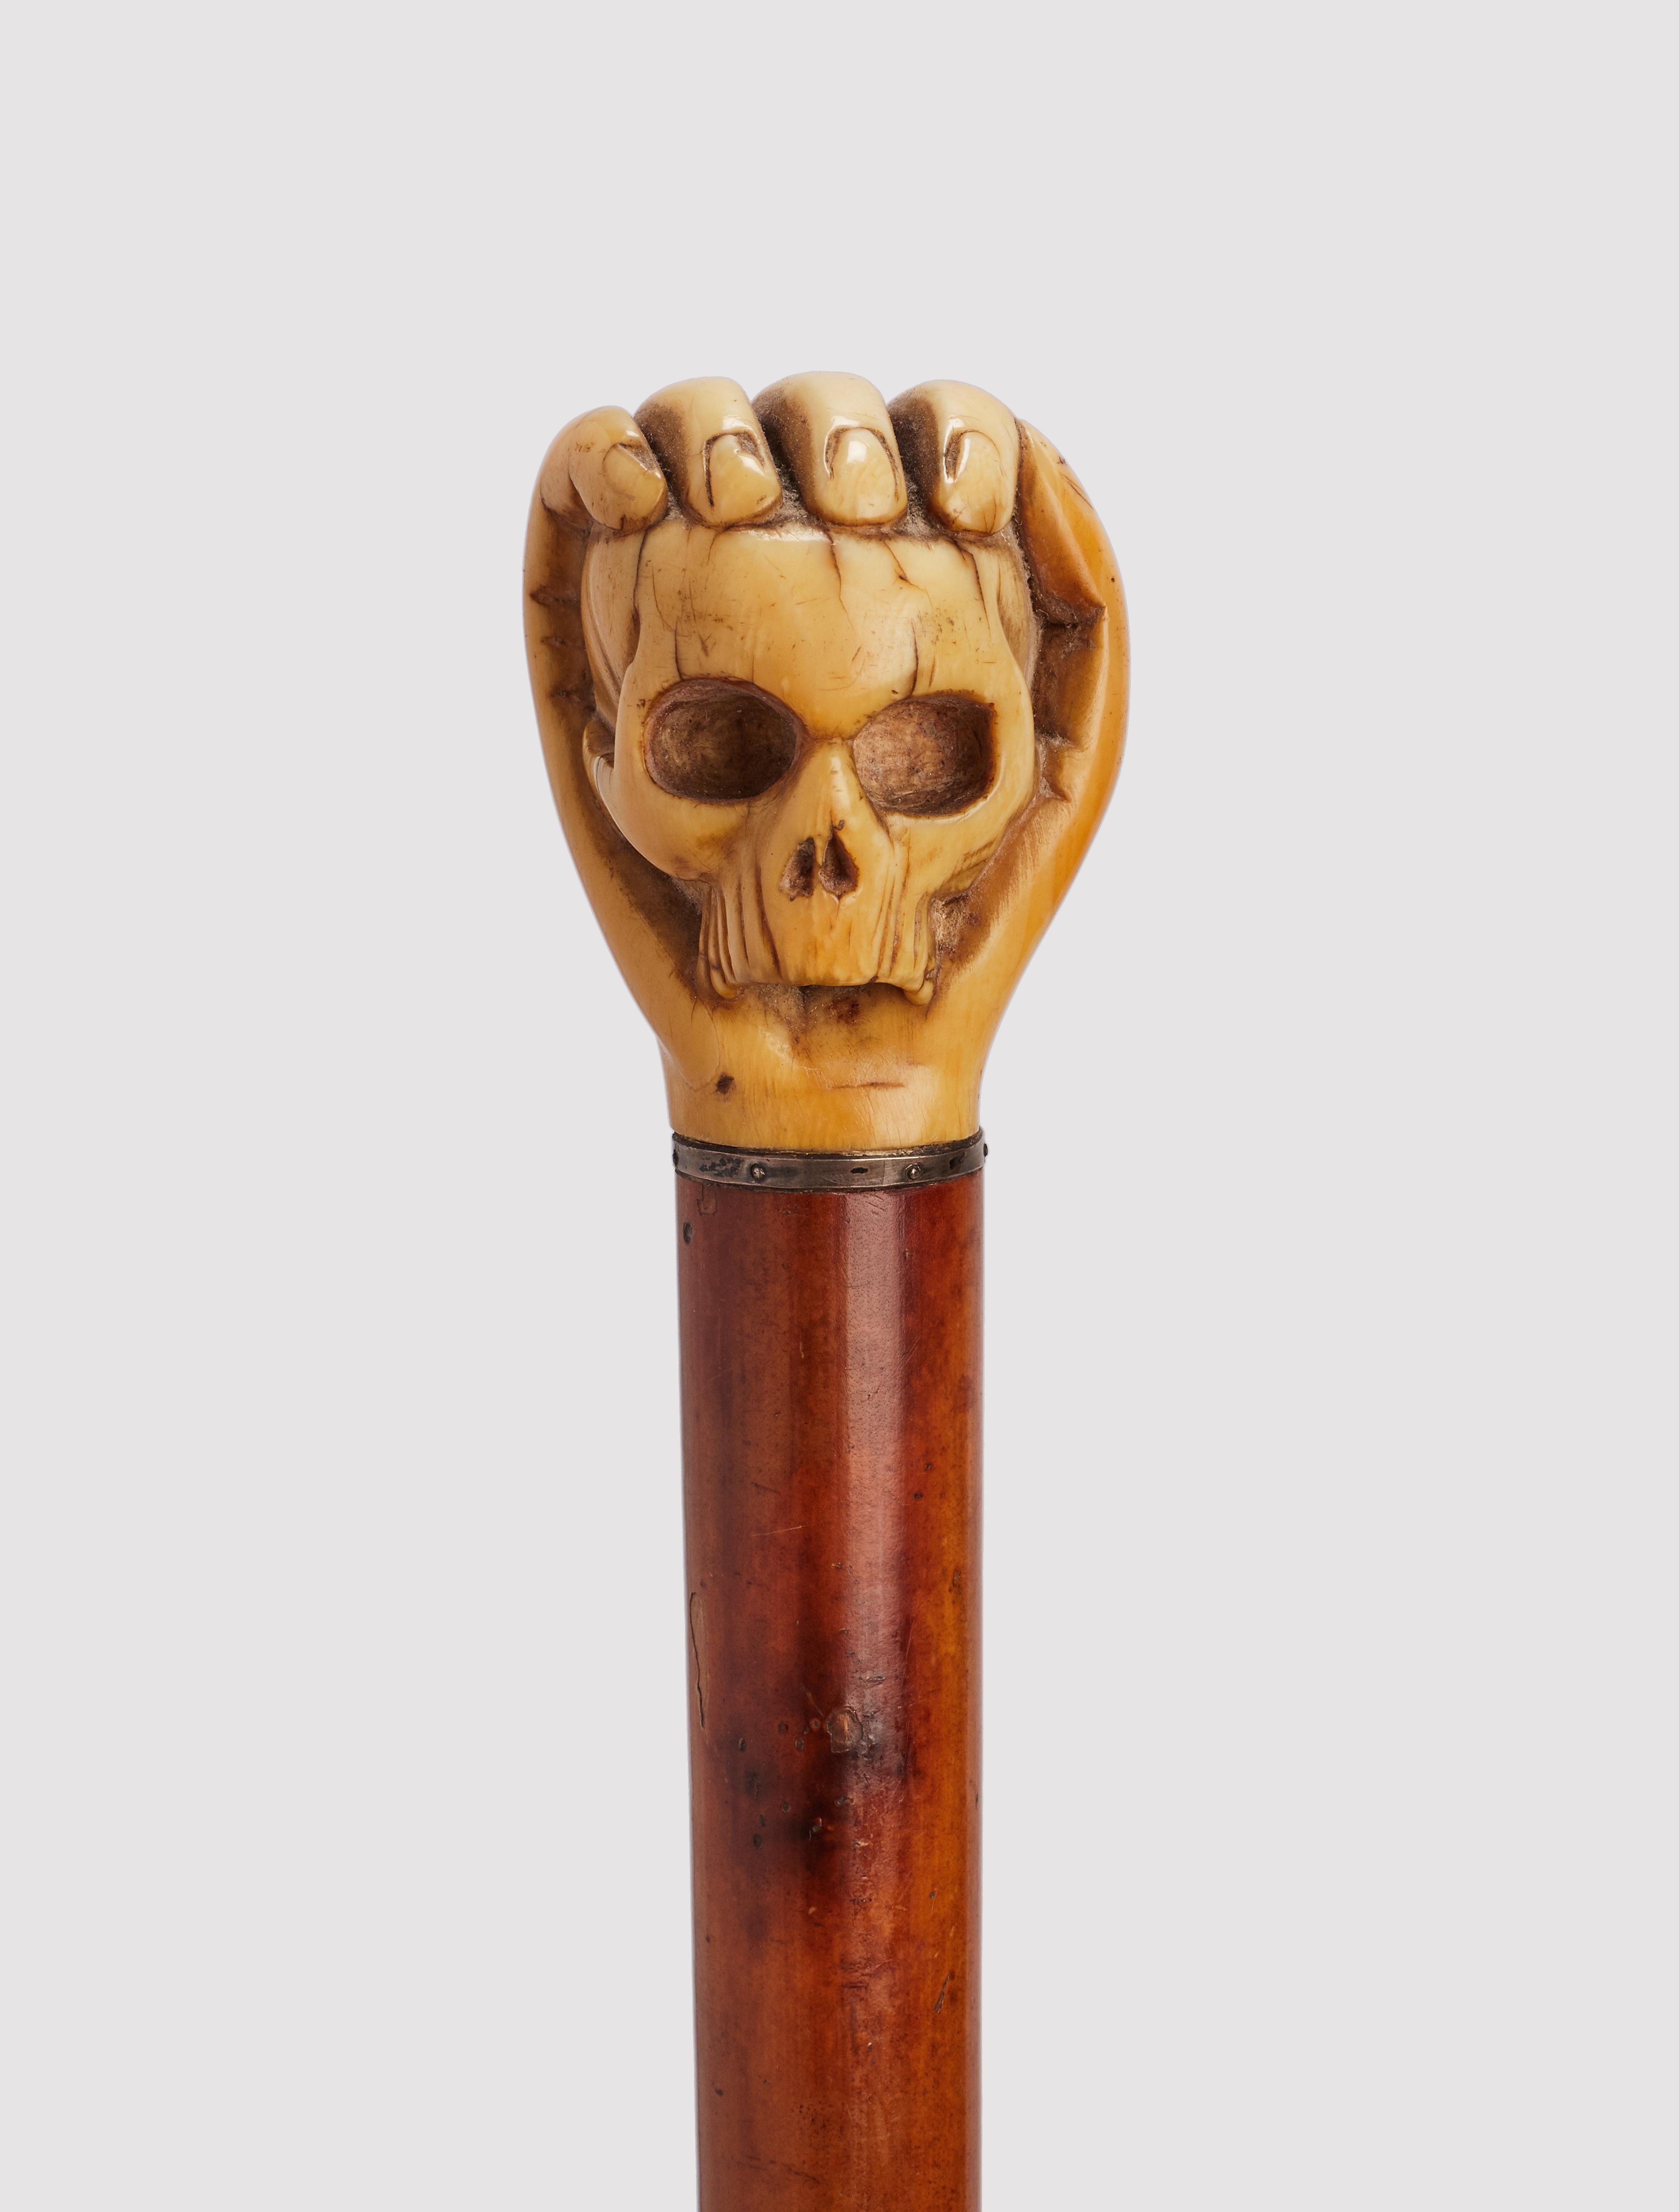 Walking stick: ivory carved handle, depicting a Memento Mori, a hand holding a skull. Malacca wood shaft. Silver ring. Horne ferrule. Germany circa 1860. (SHIP TO EU ONLY)